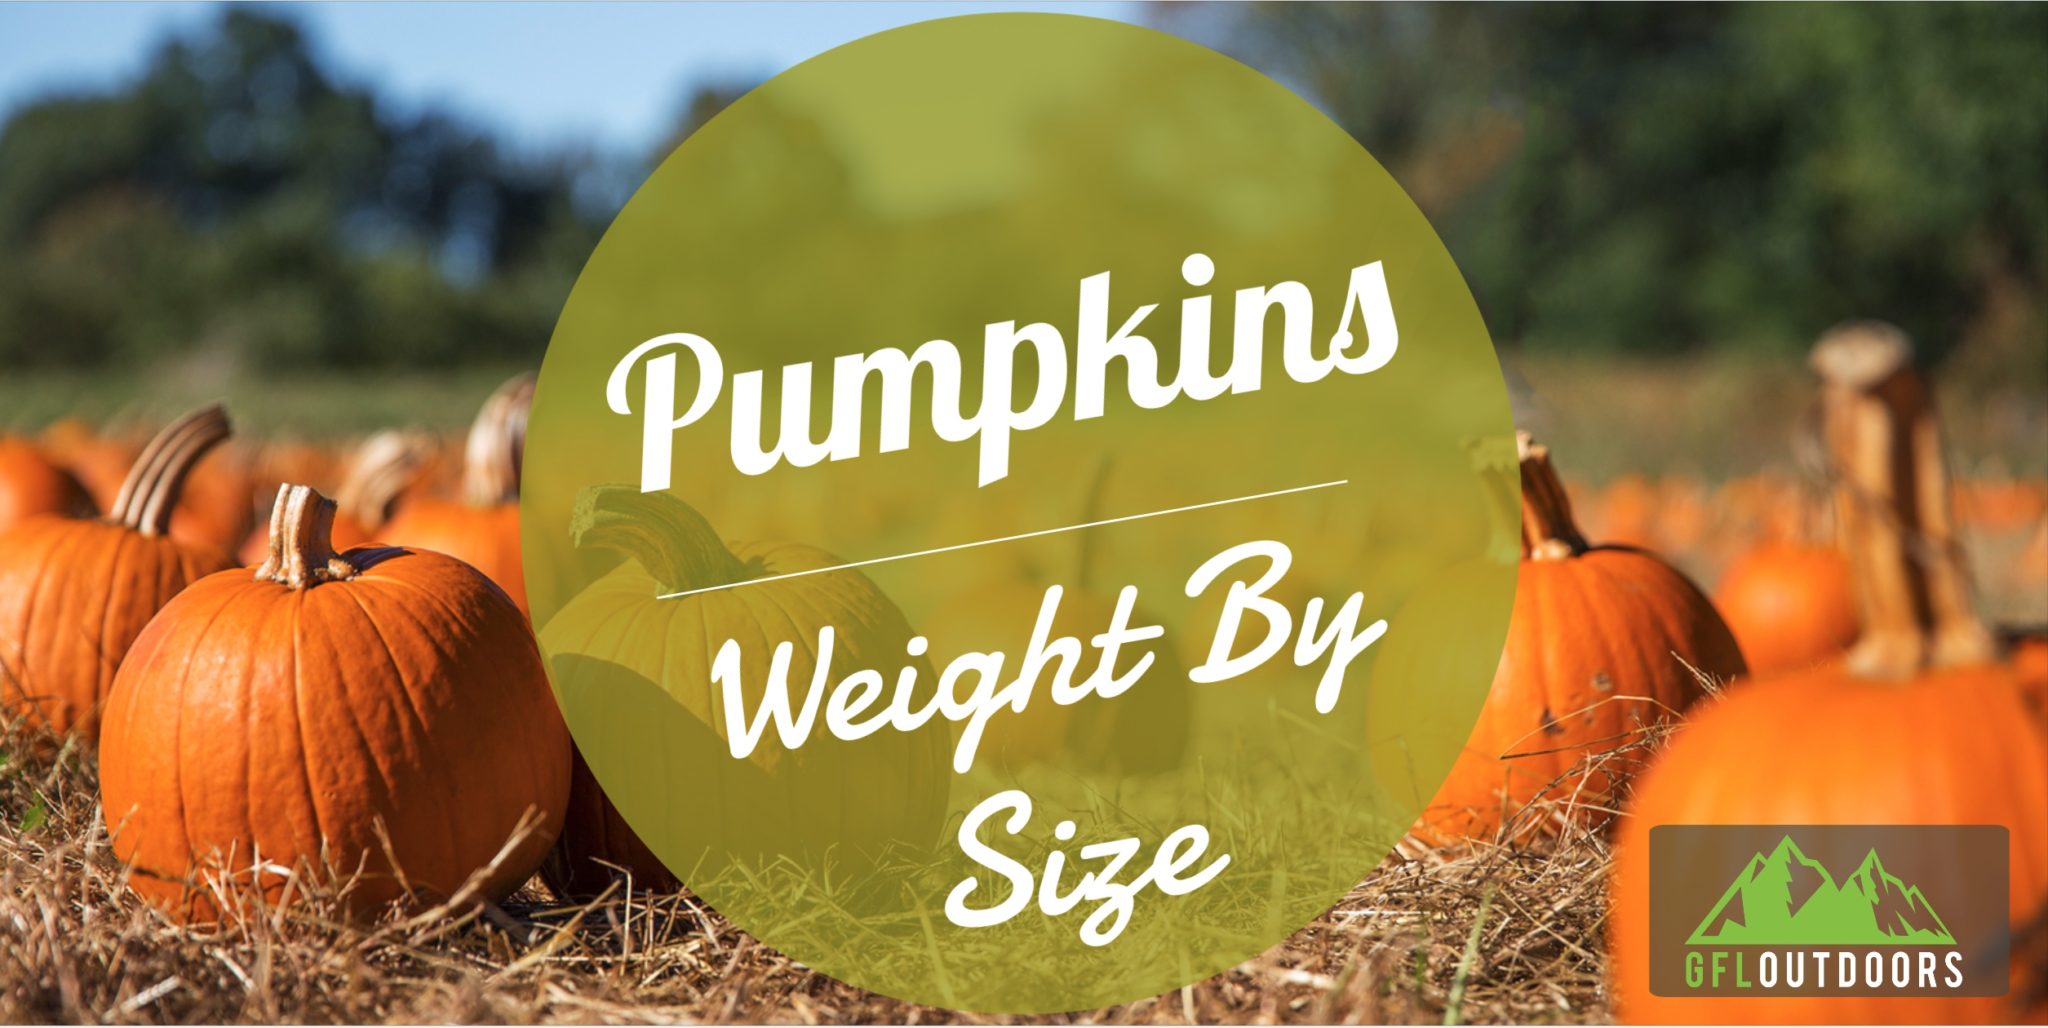 how many kg does a pumpkin weigh?